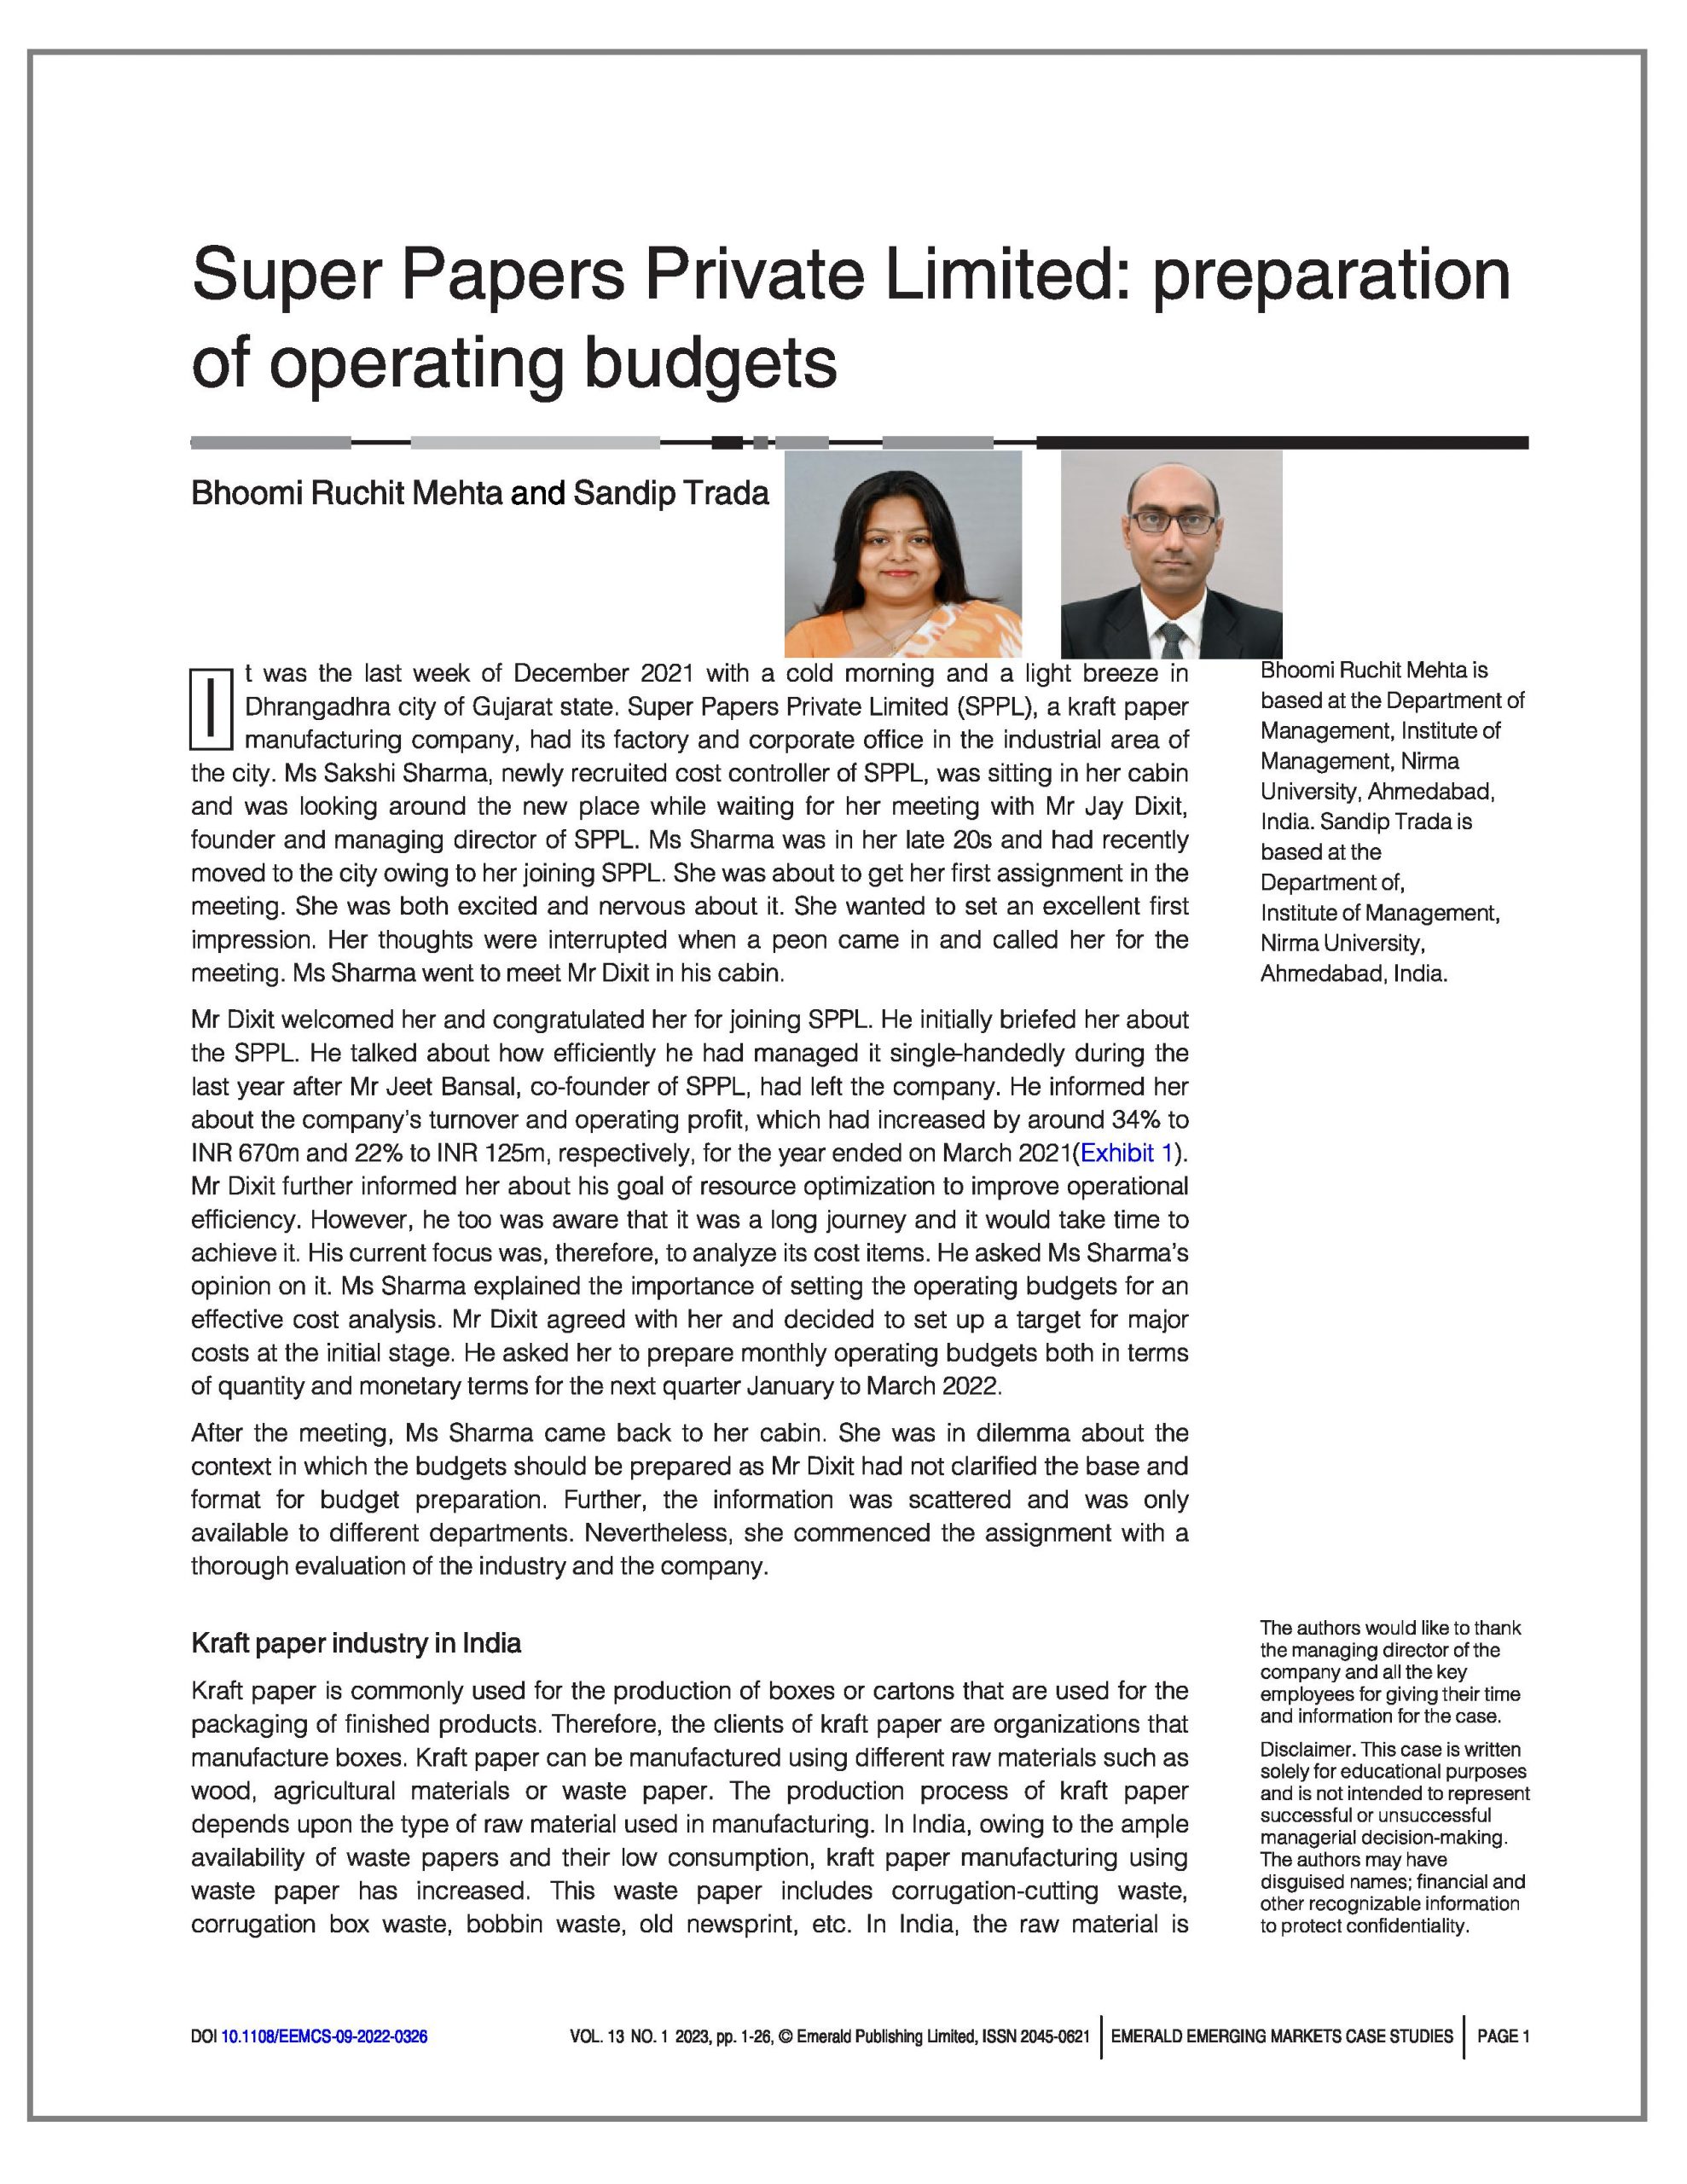 Super Papers Private Limited: Preparation of Operating Budgets